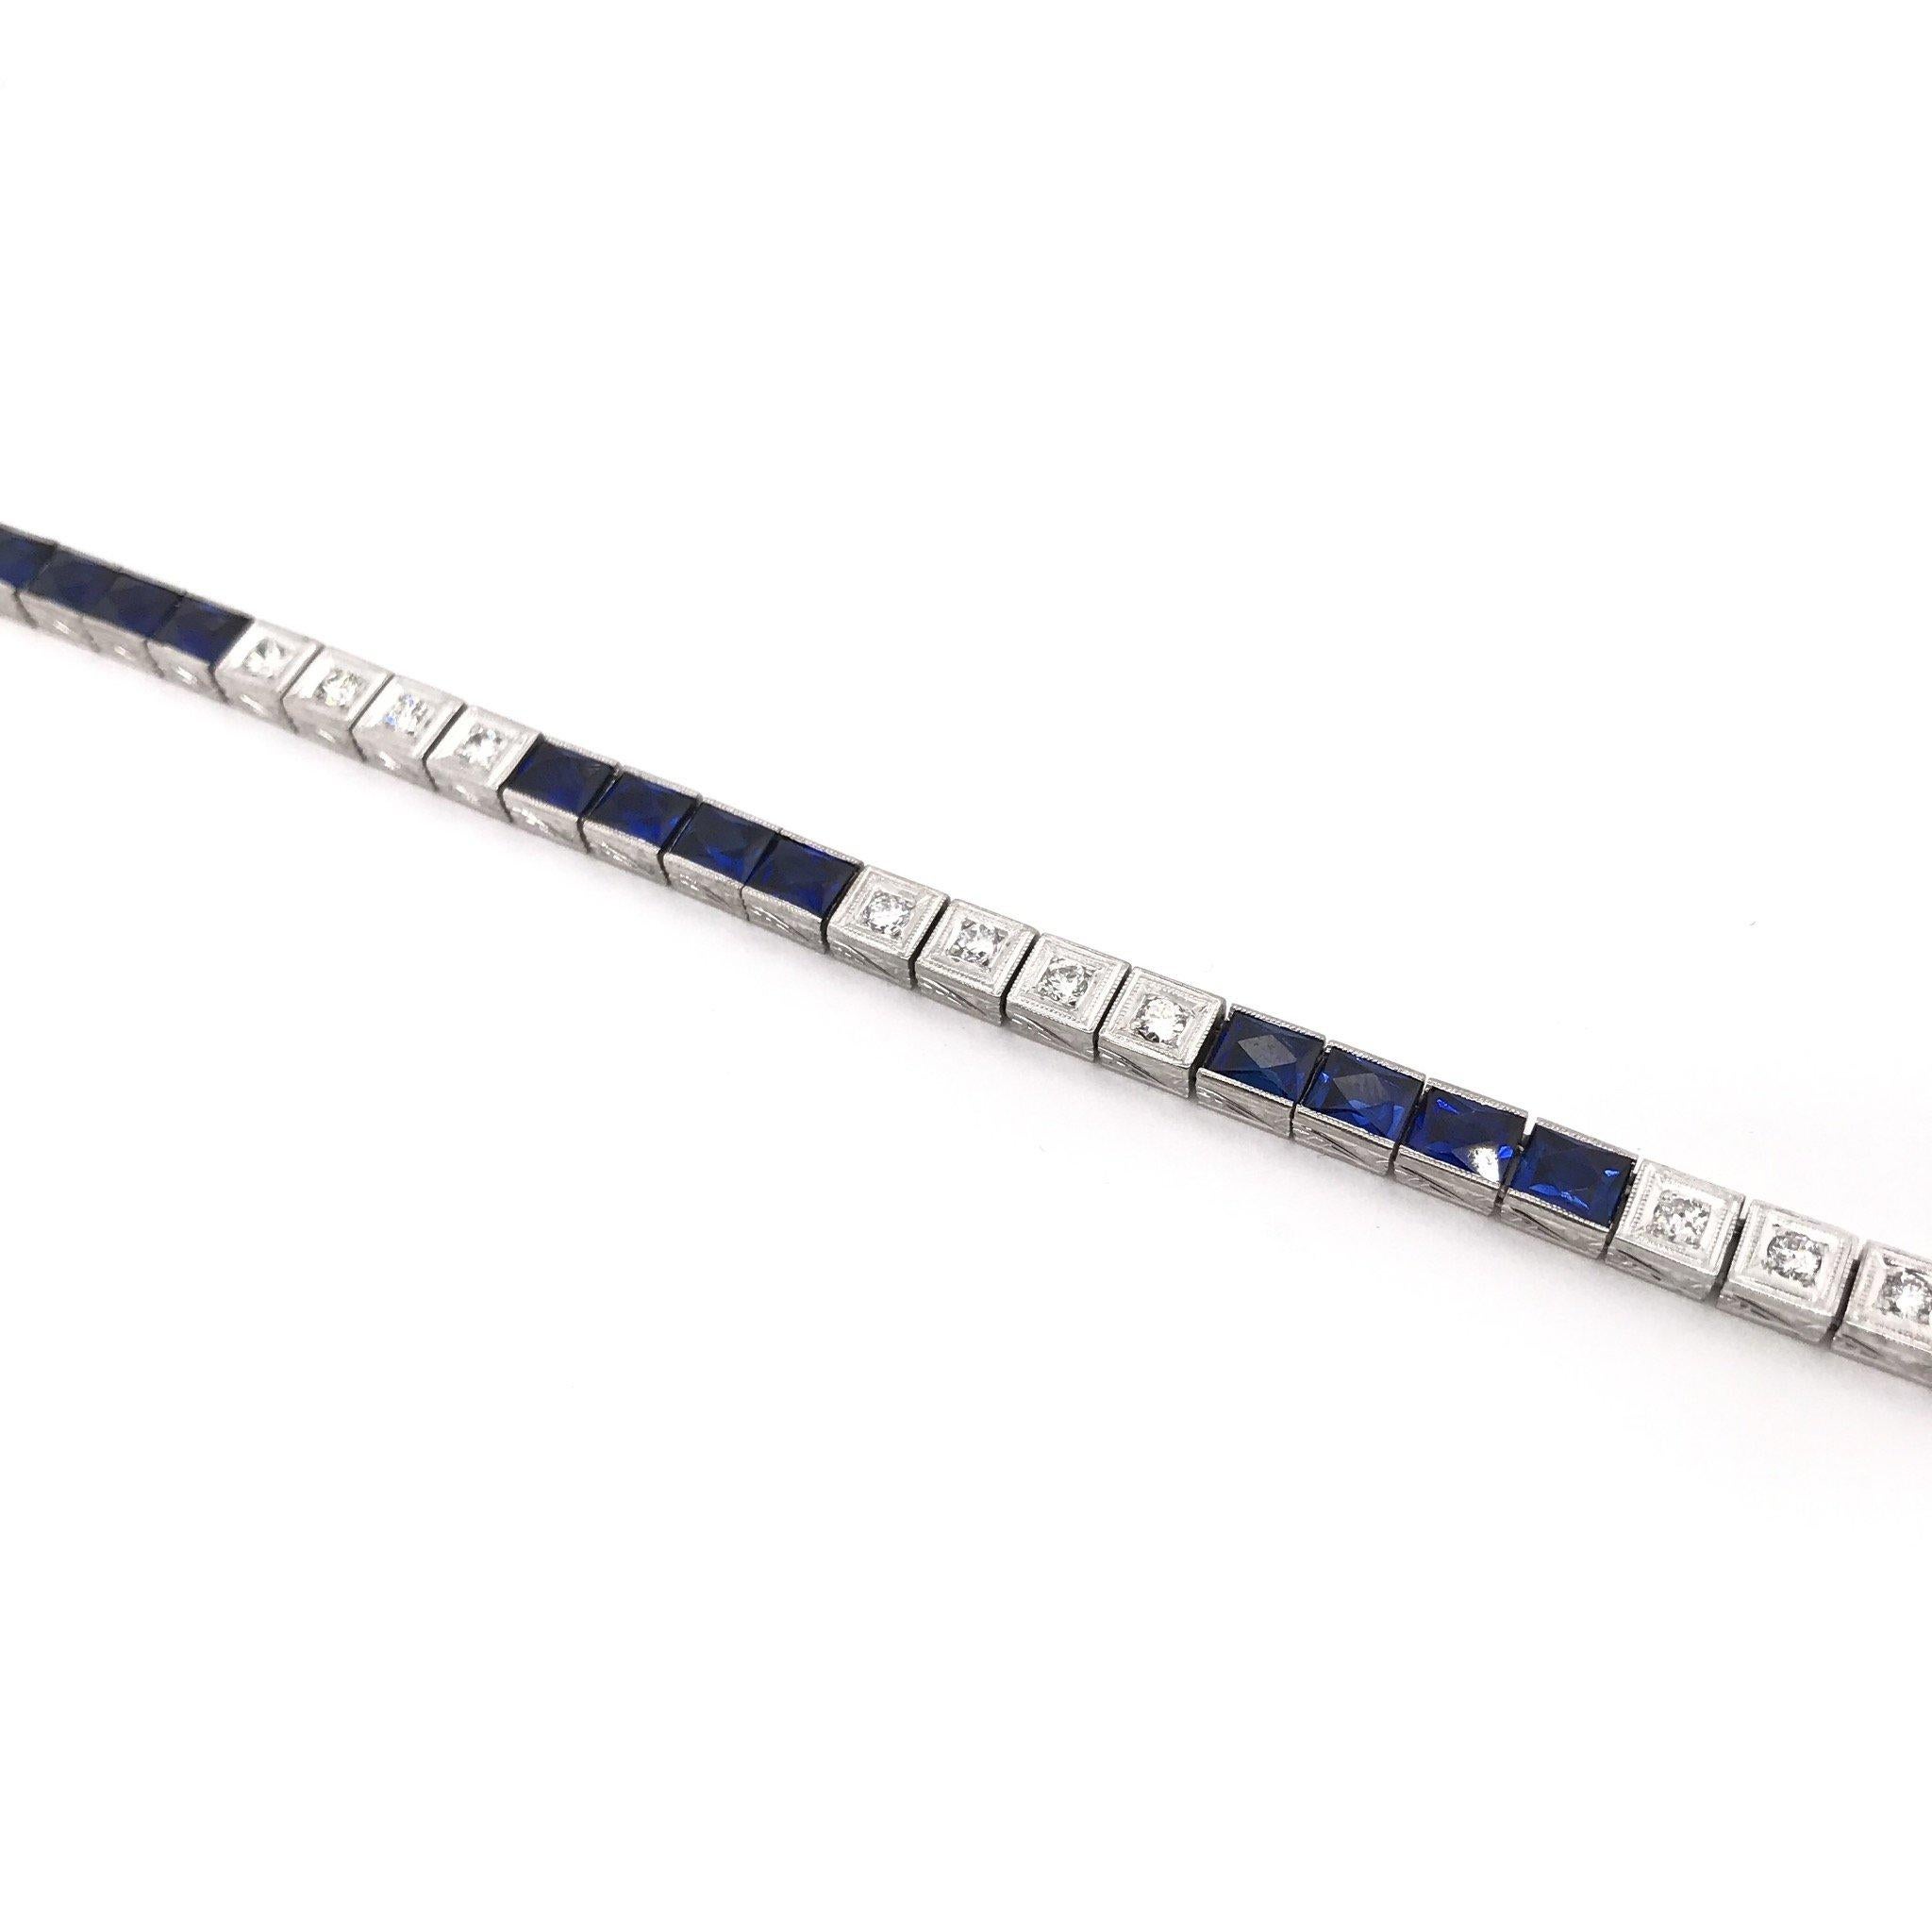 This antique piece was handcrafted sometime during the Art Deco design period ( 1920-1940 ). The 18k white gold bracelet features a combined total weight of one carat of diamonds. The bracelet also features 20 bright sparkling synthetic blue